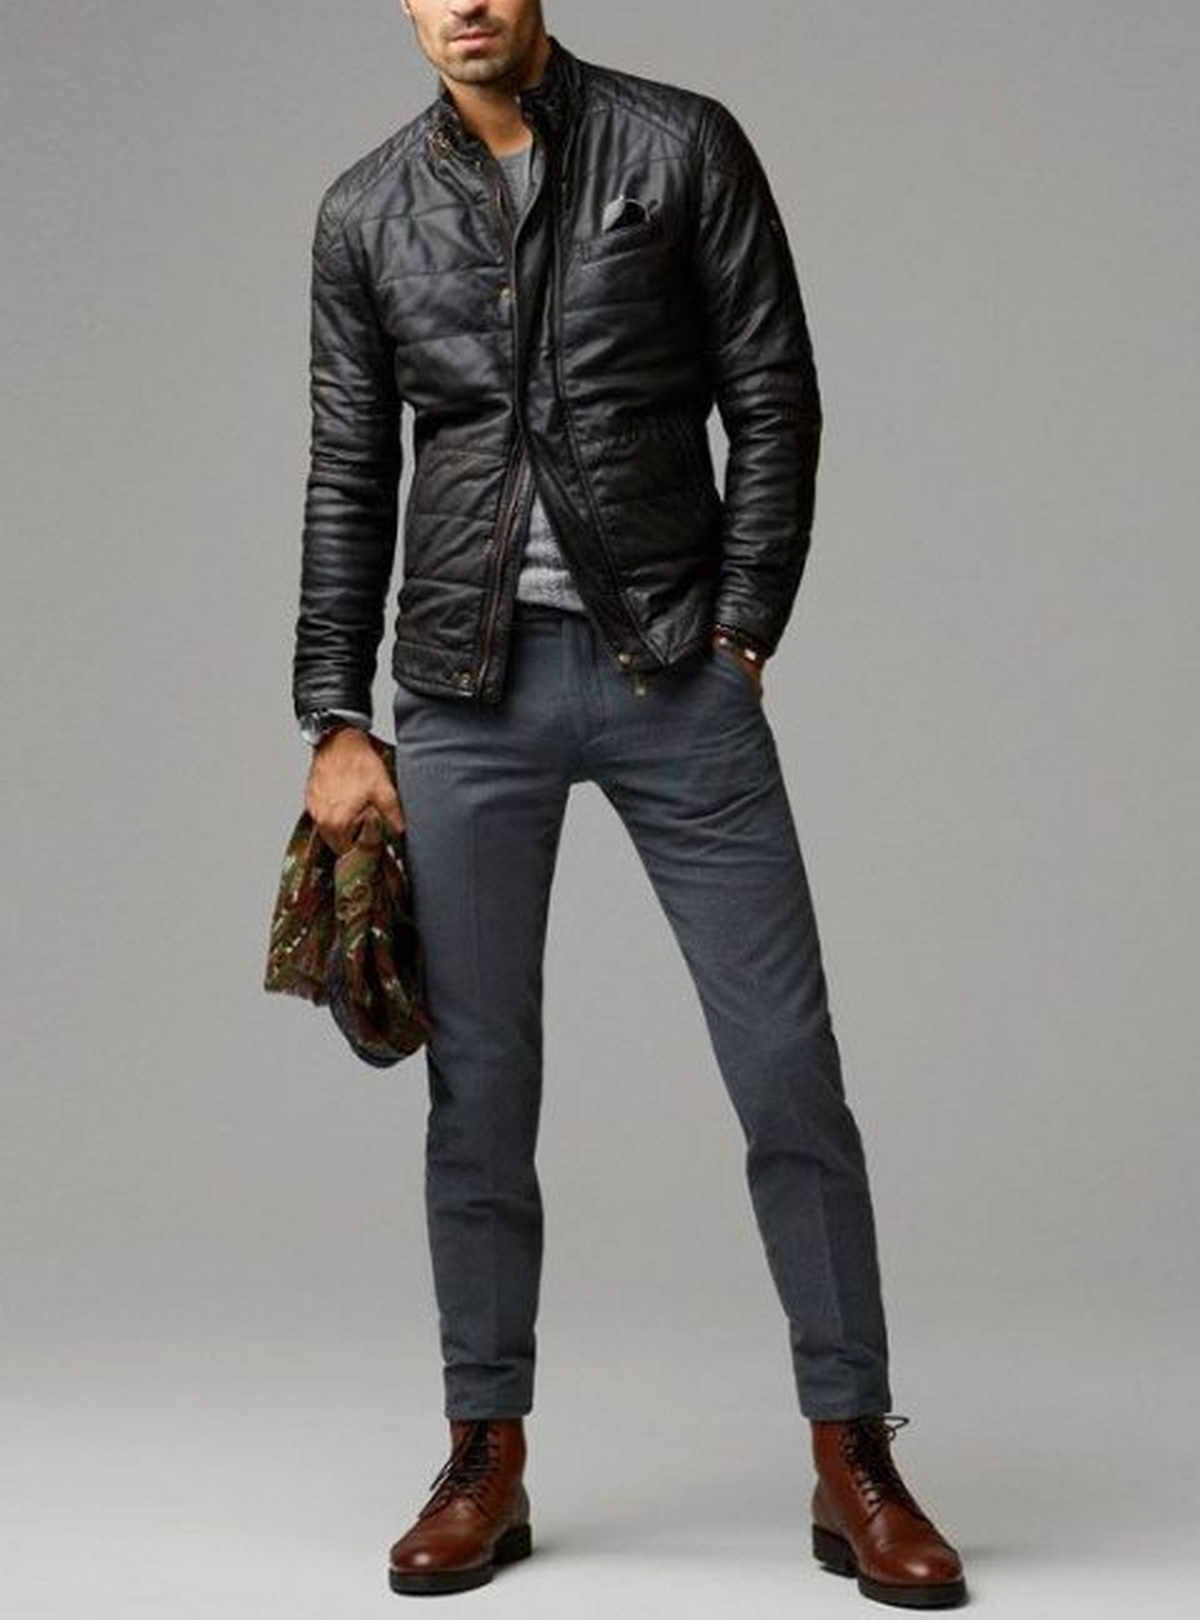 Leather Jackets With Gray Pants For Men